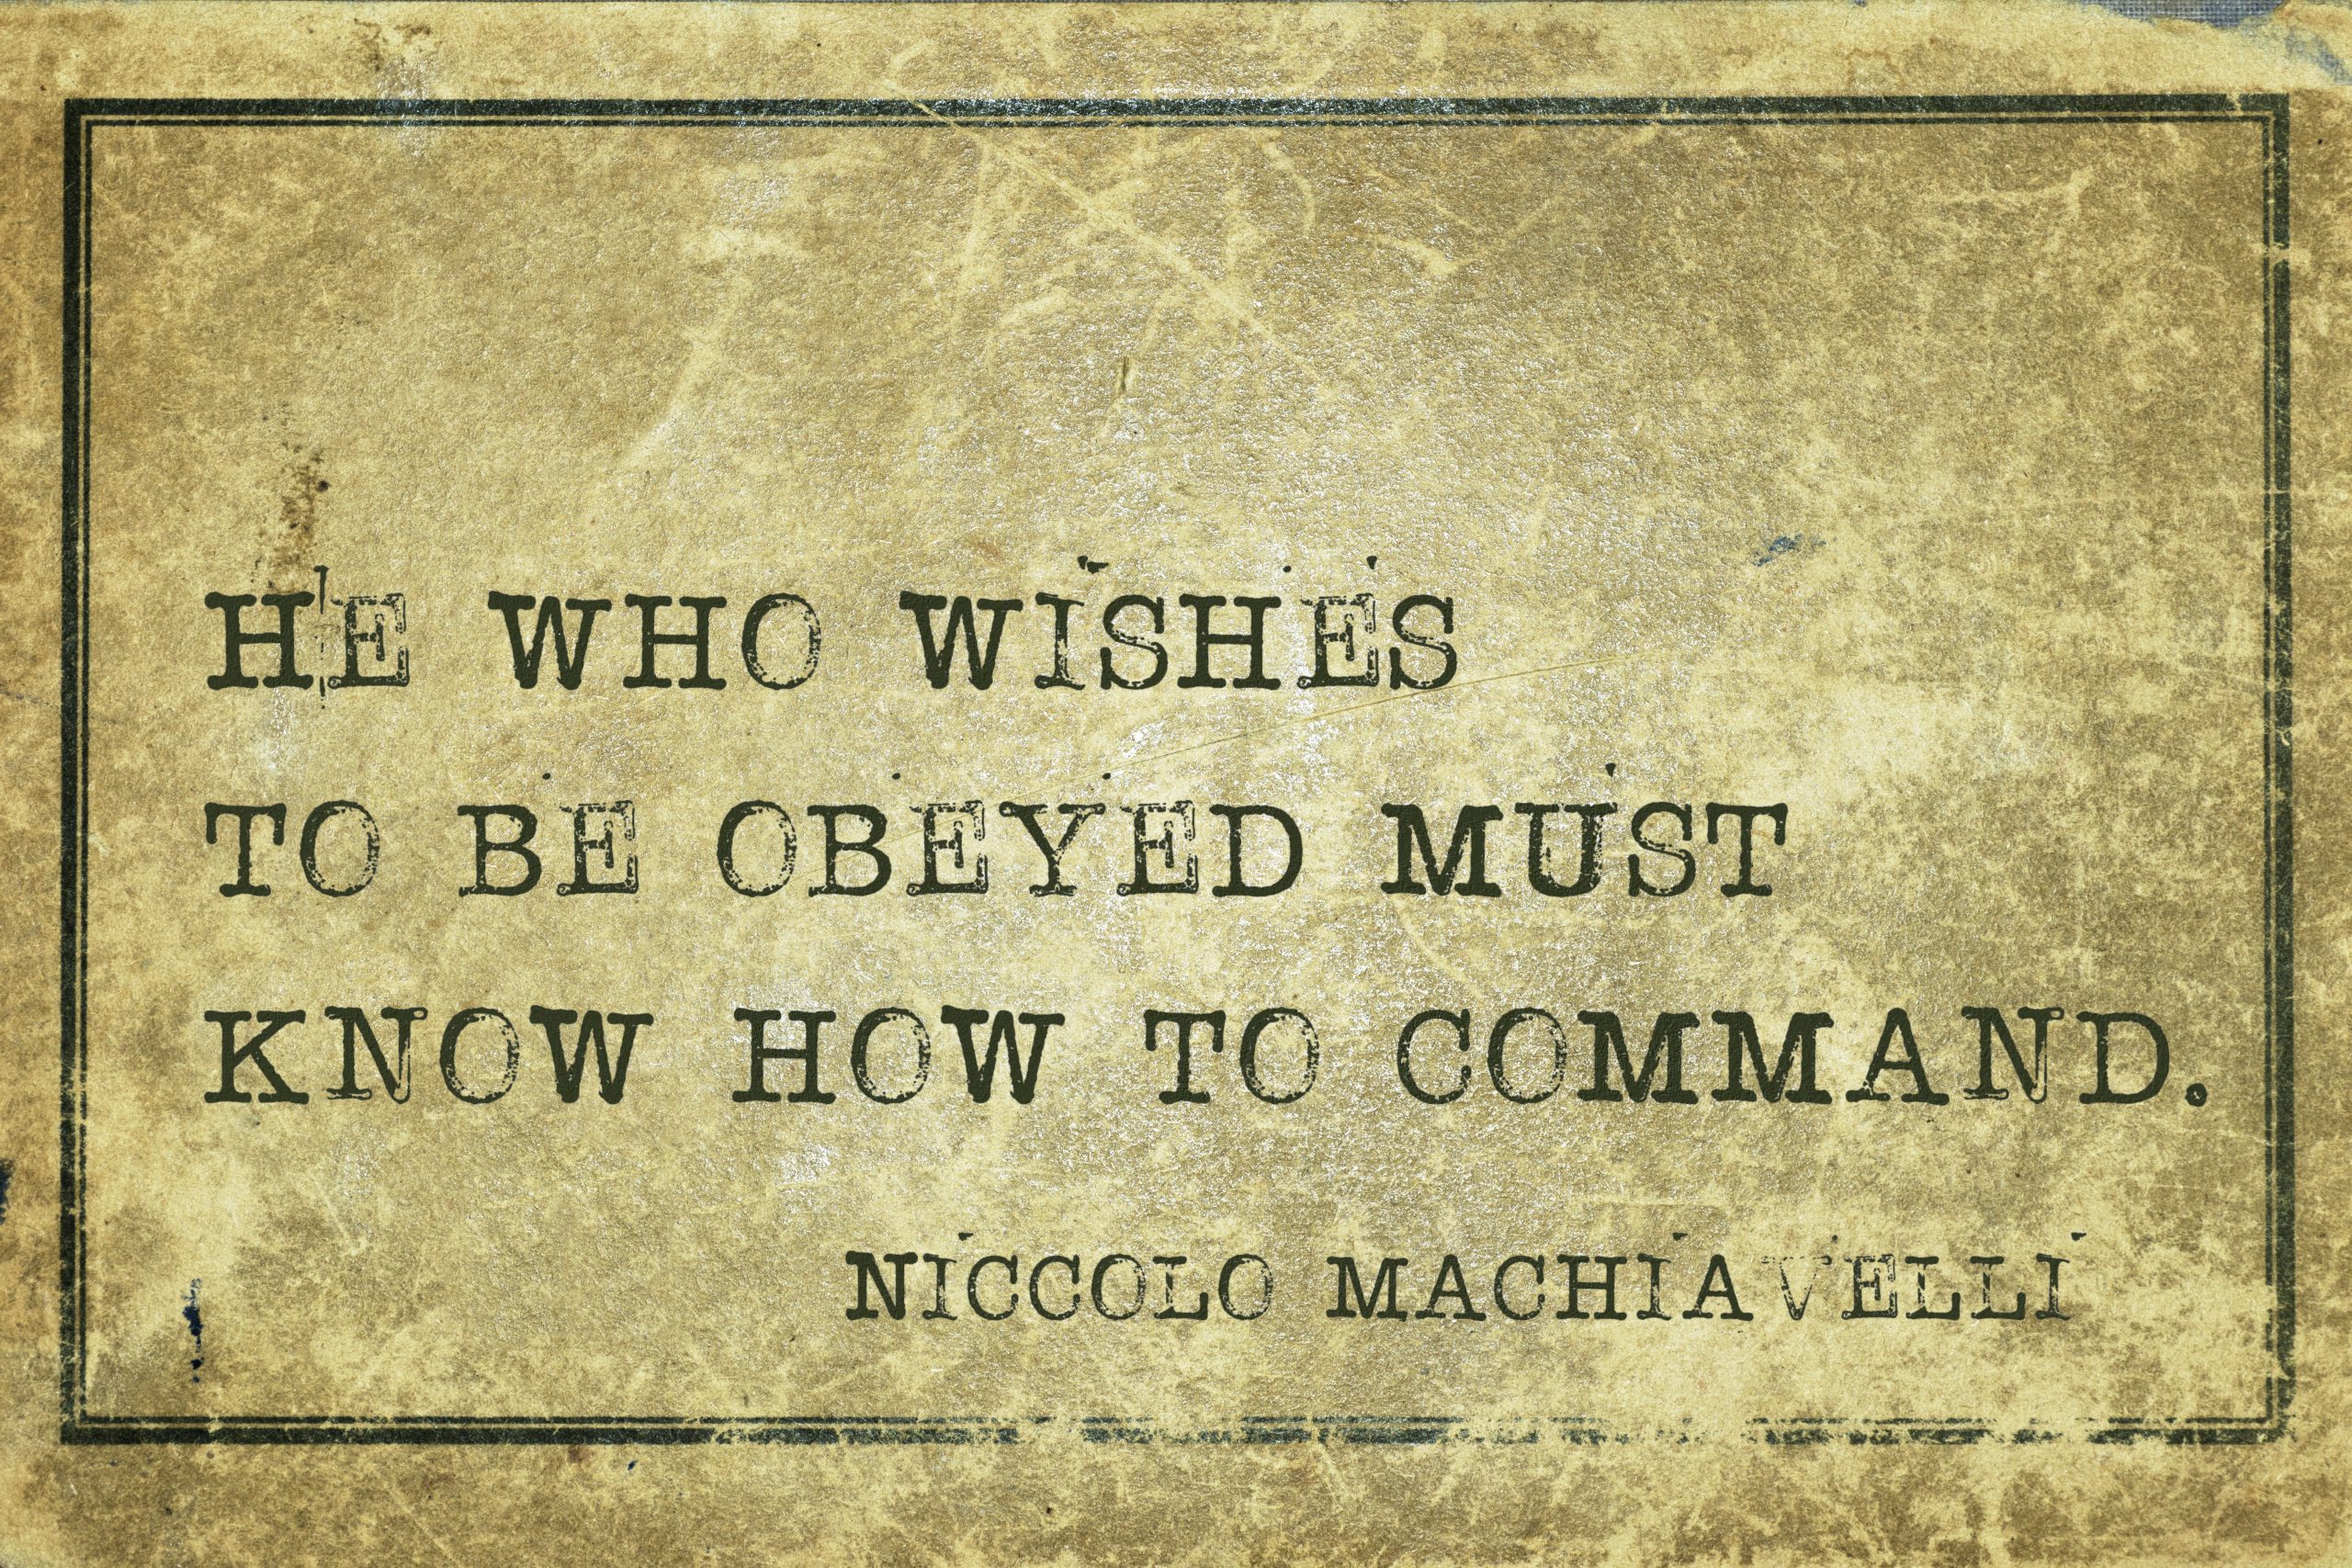 He who wishes to be obeyed must know how to command - ancient Italian philosopher Niccolo Machiavelli quote. Depositphotos.